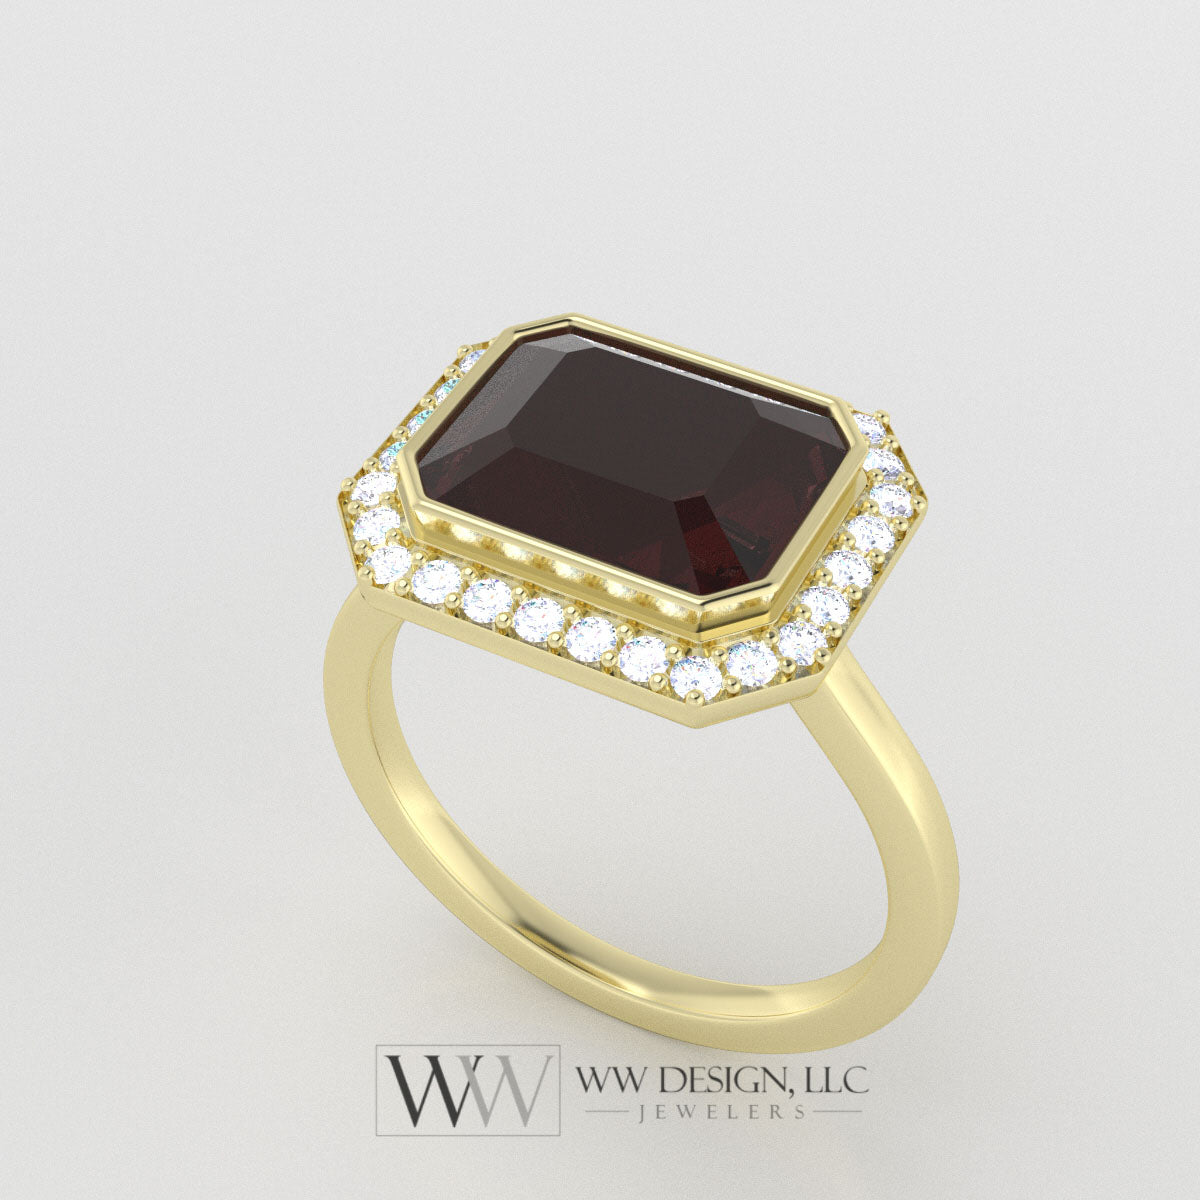 Genuine 4ct Mozambique Garnet East West Emerald Shaped Ring with 0.28ctw Diamond Halo - 14k 18k Gold (Y, R,W) Platinum